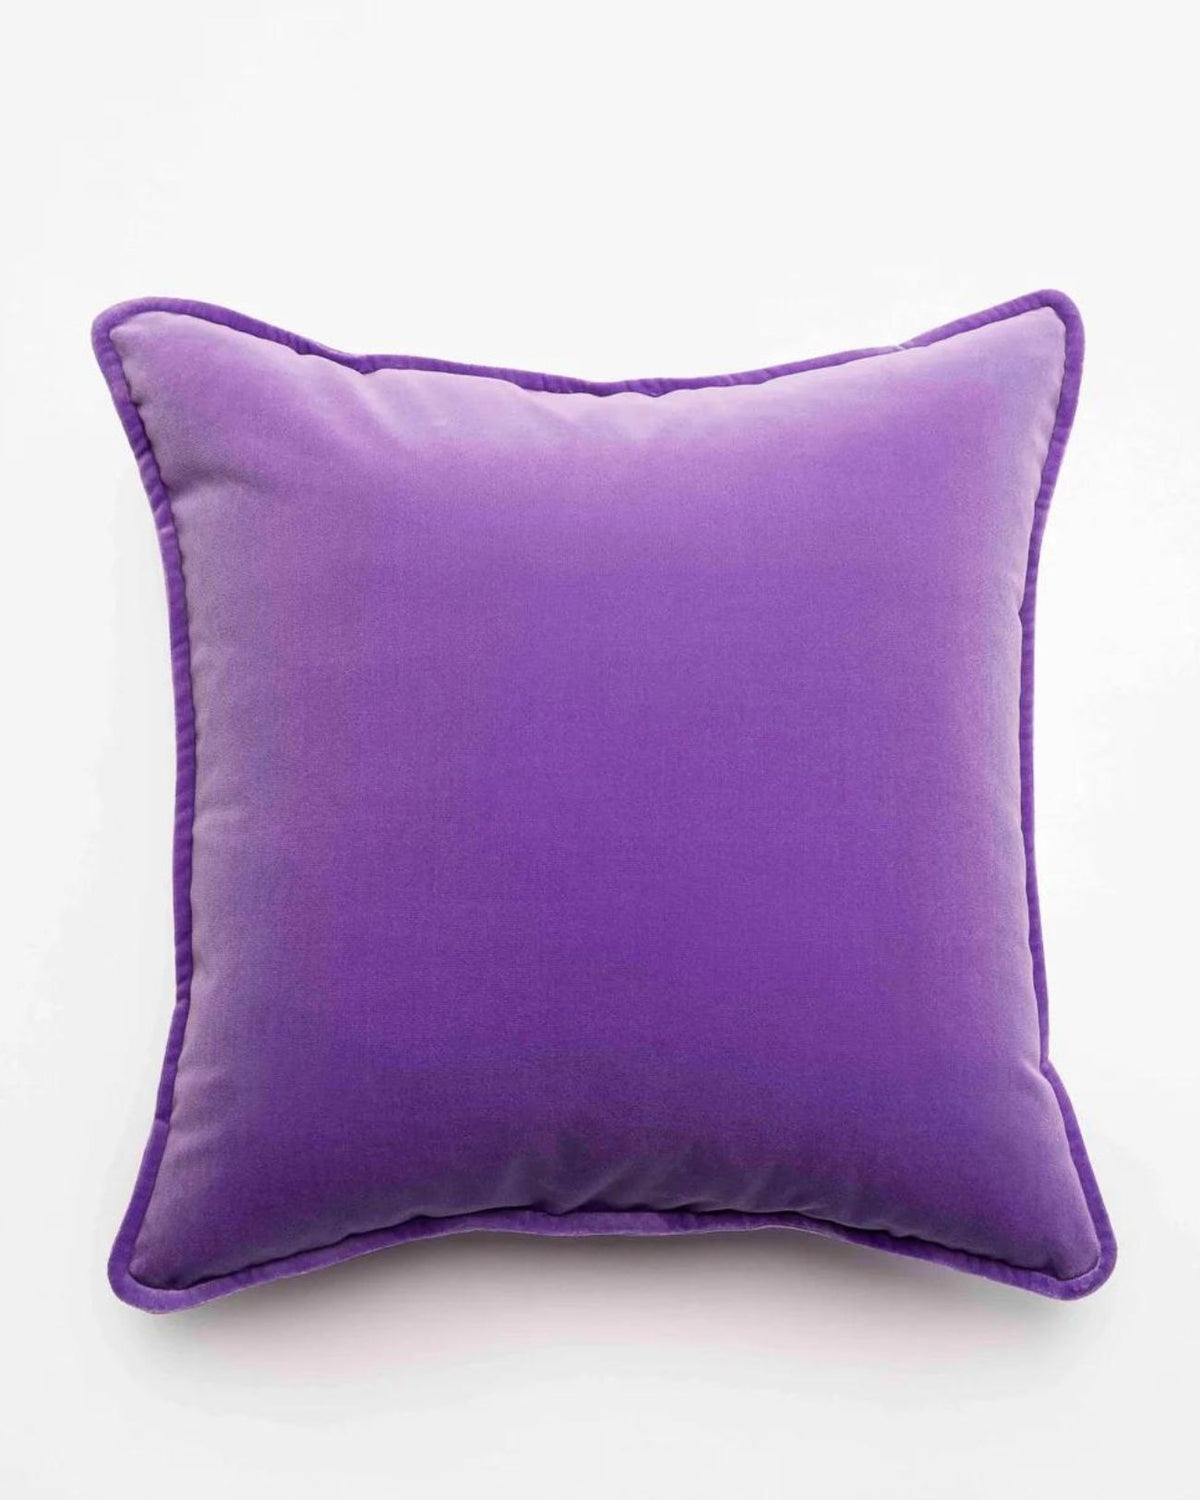 Finish off your kid's bedrooms with this gorgeous lilac velour cushion. Cushion is filled with polyester fibres. Finished with a detailed piped edge and cushion cover can be zipped off for machine wash. Limited stock.  50 x 50cm  